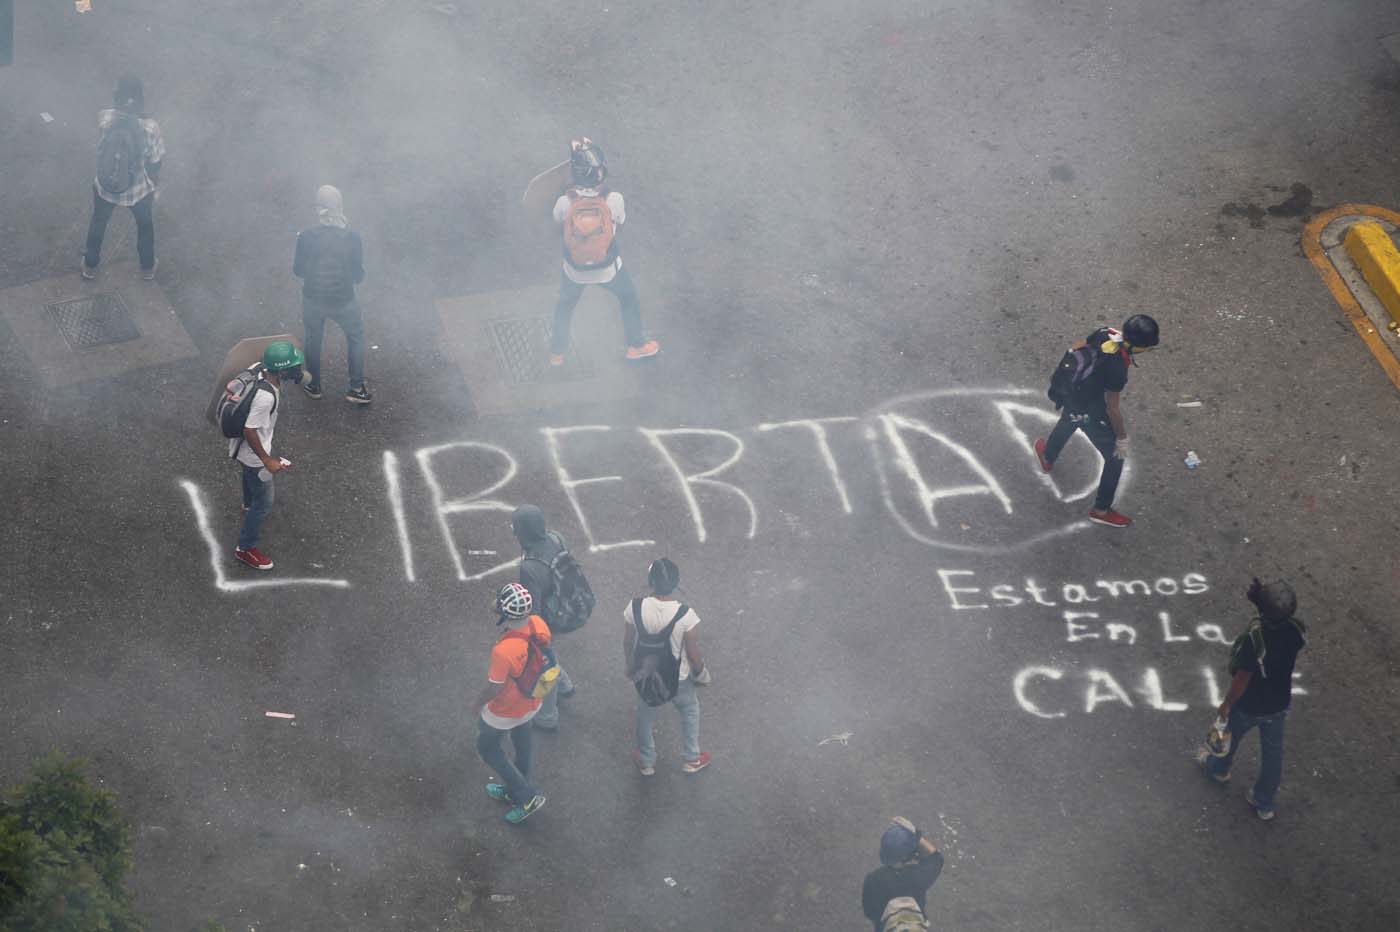 Opposition supporters paint a graffiti that reads "Freedom" while rallying against President Nicolas Maduro in Caracas, Venezuela, May 8, 2017. REUTERS/Christian Veron